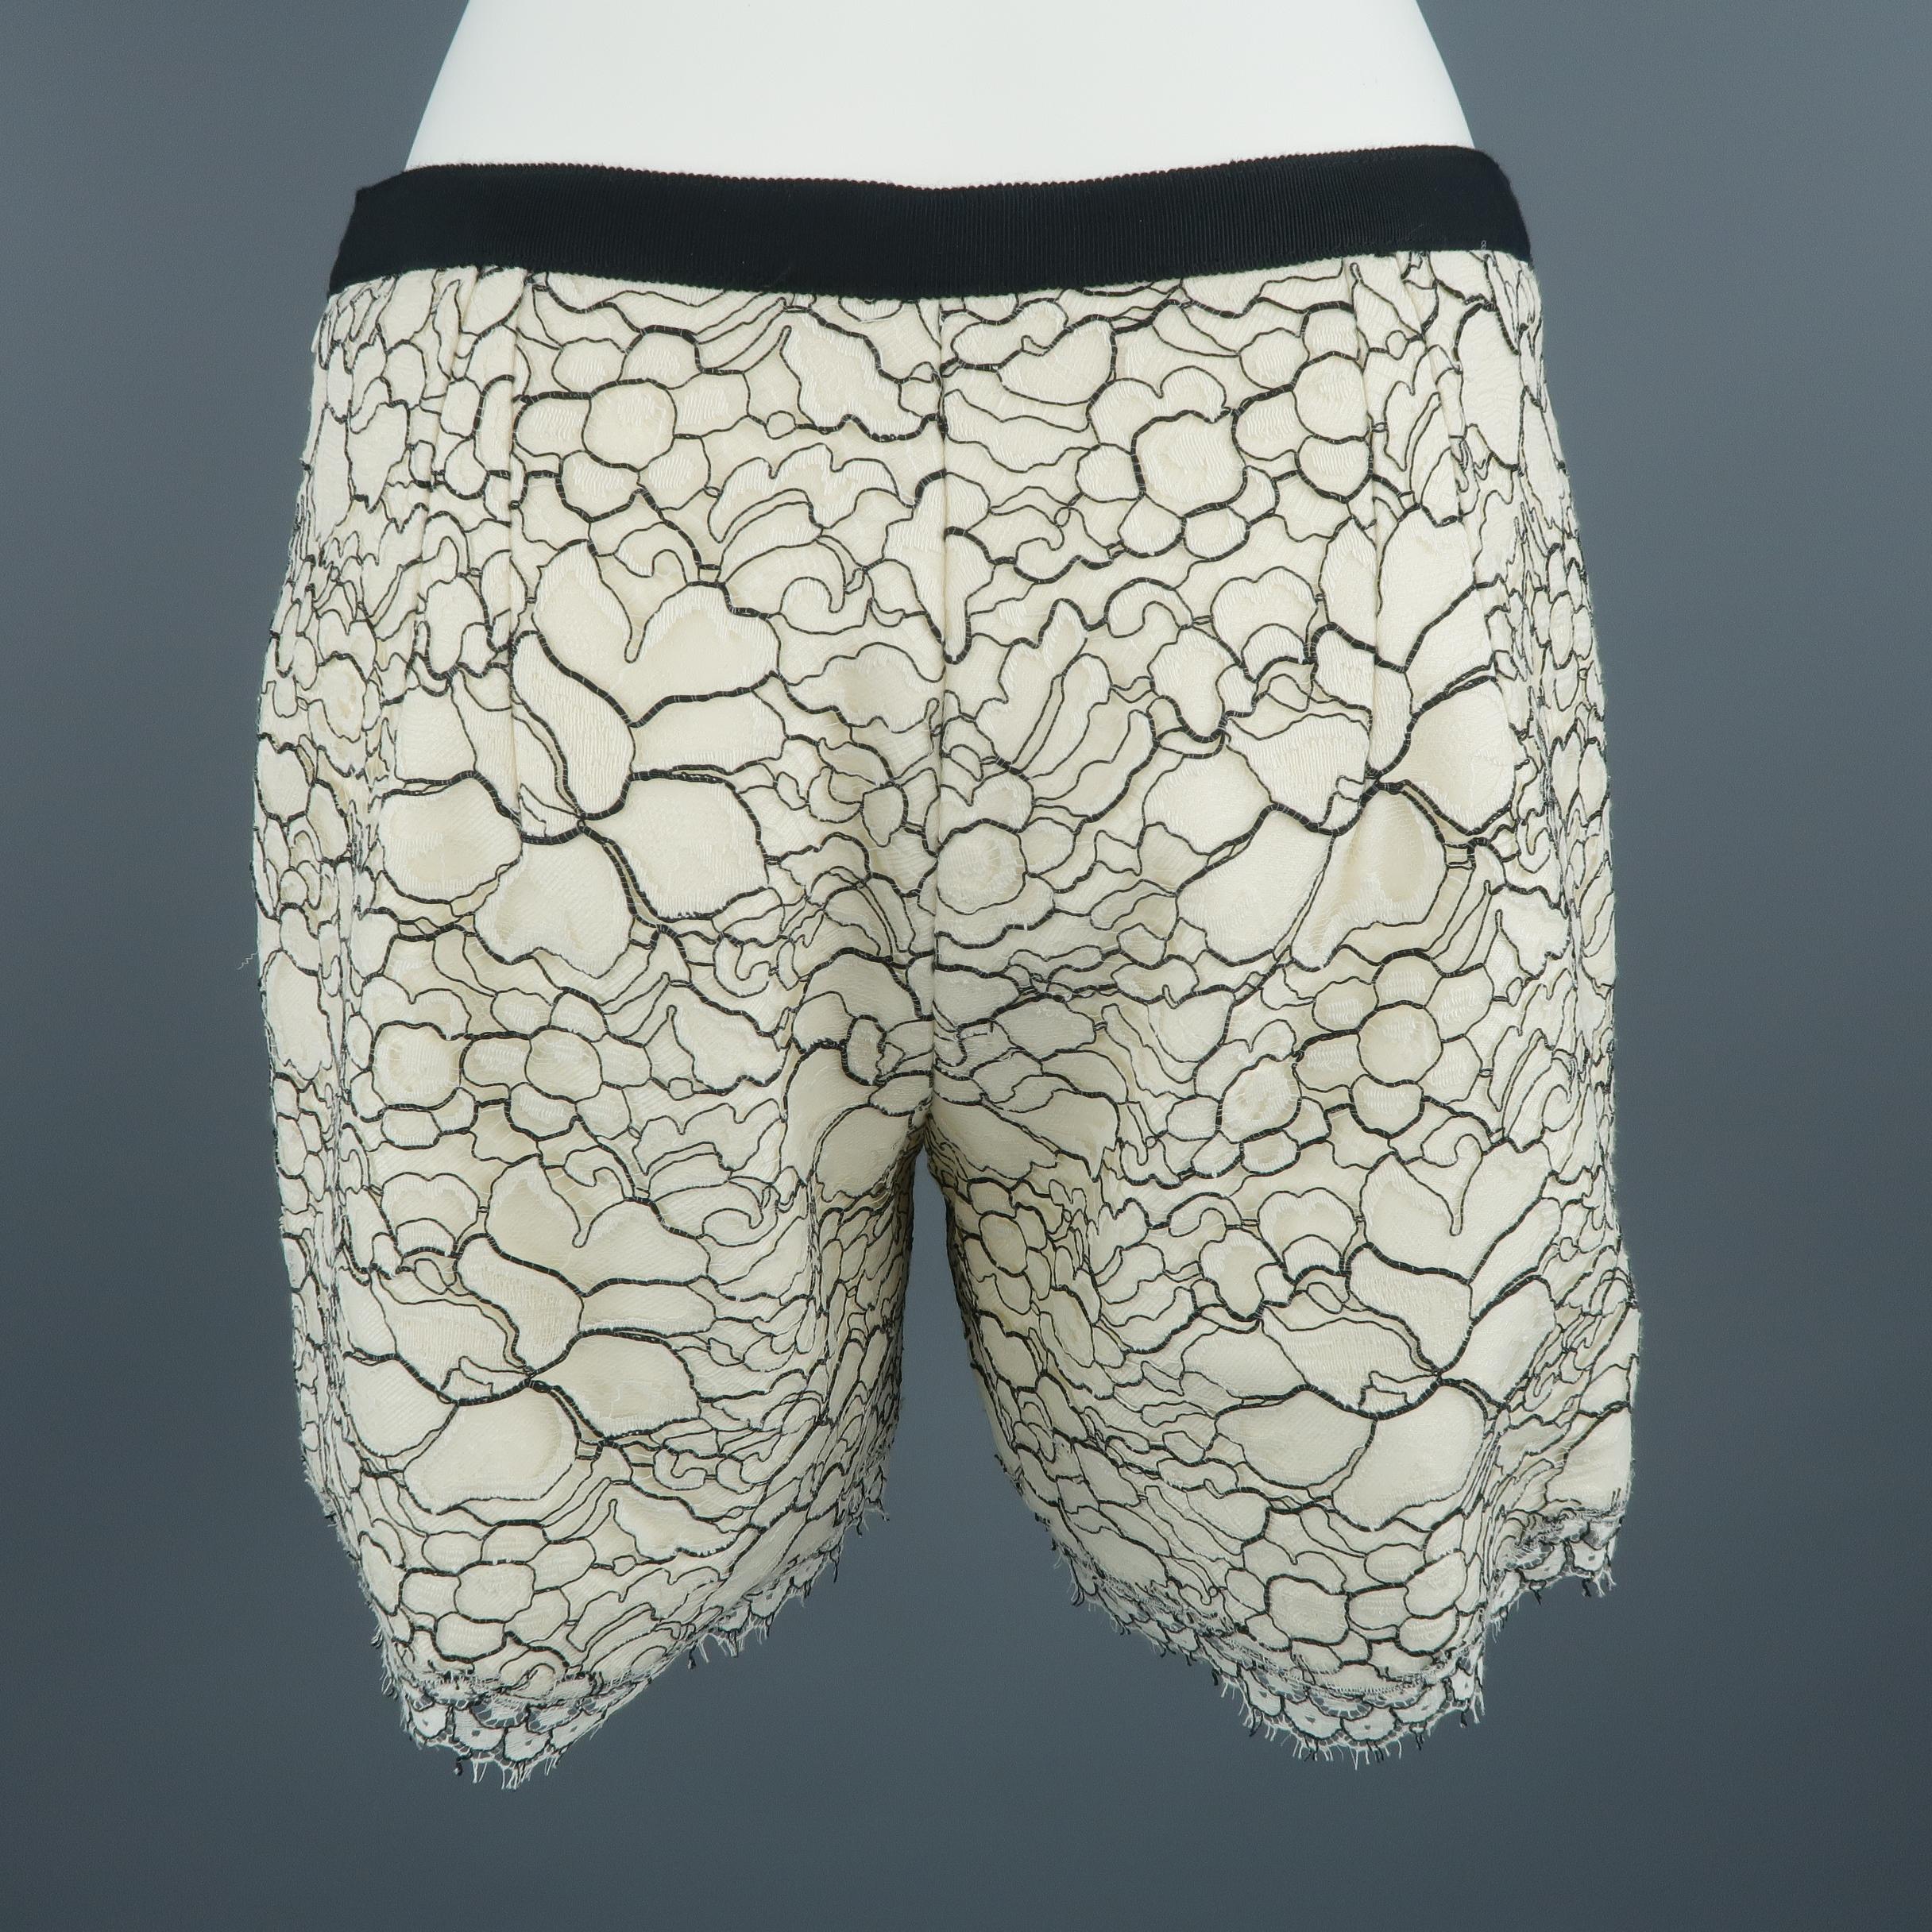 ANDREW GN shorts, come in white and black tones, wool and floral lace material, with black ribbons and slant side pockets. Made in France.
 
Excellent Pre-Owned Condition.
Marked: 38 FR
 
Measurements:
 
Waist: 29 in.
Rise: 8.5 in.
Inseam: 5 in.